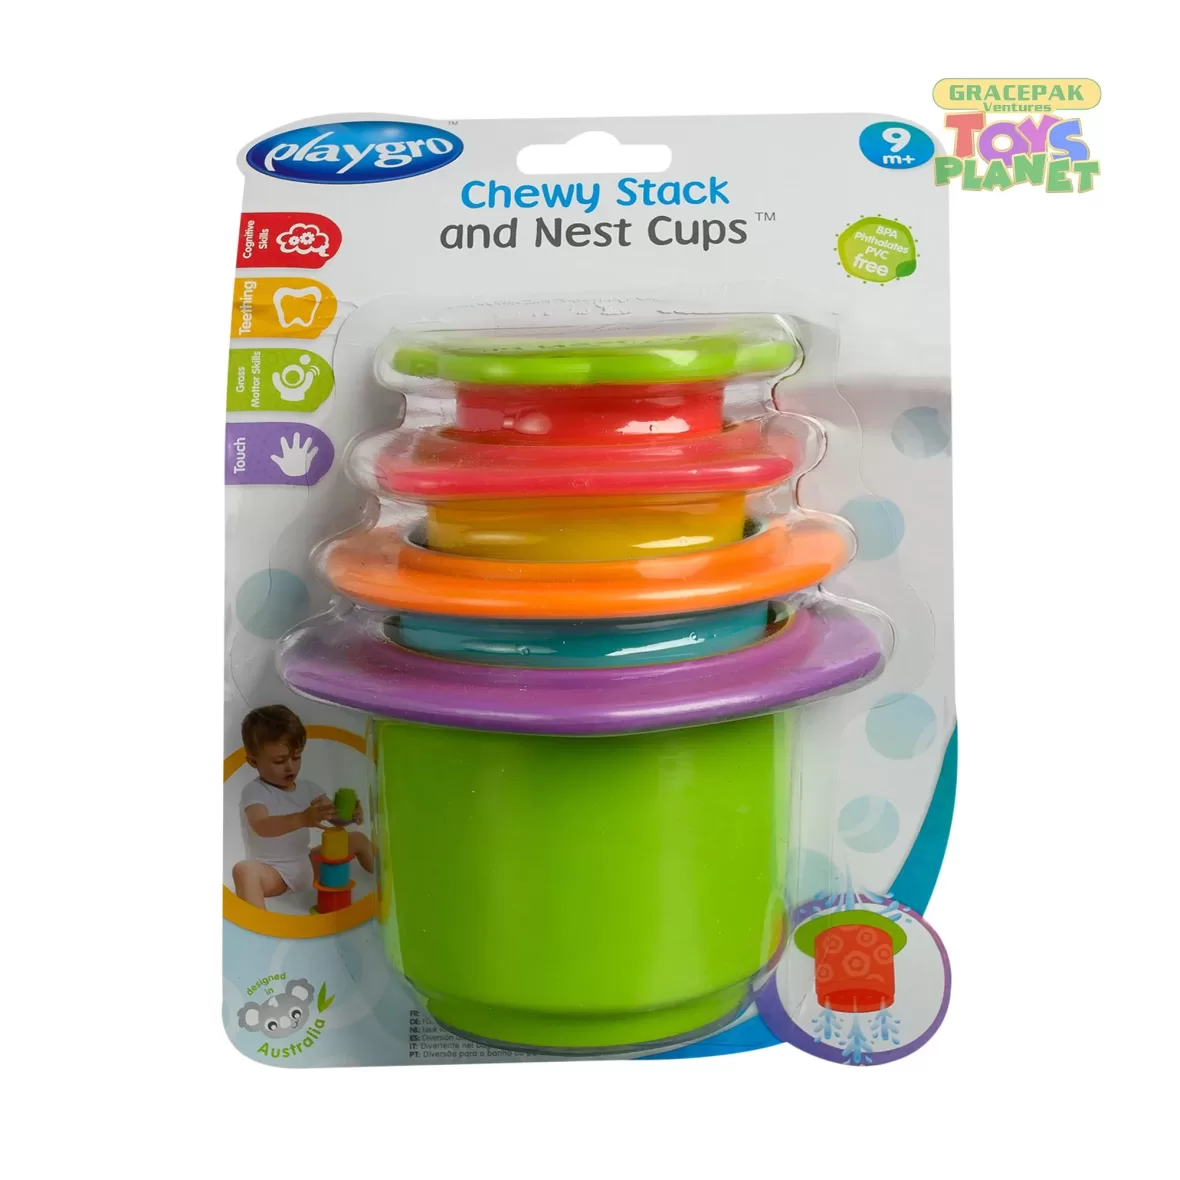 Playgro_Chewy Stack and Nest Cups_2